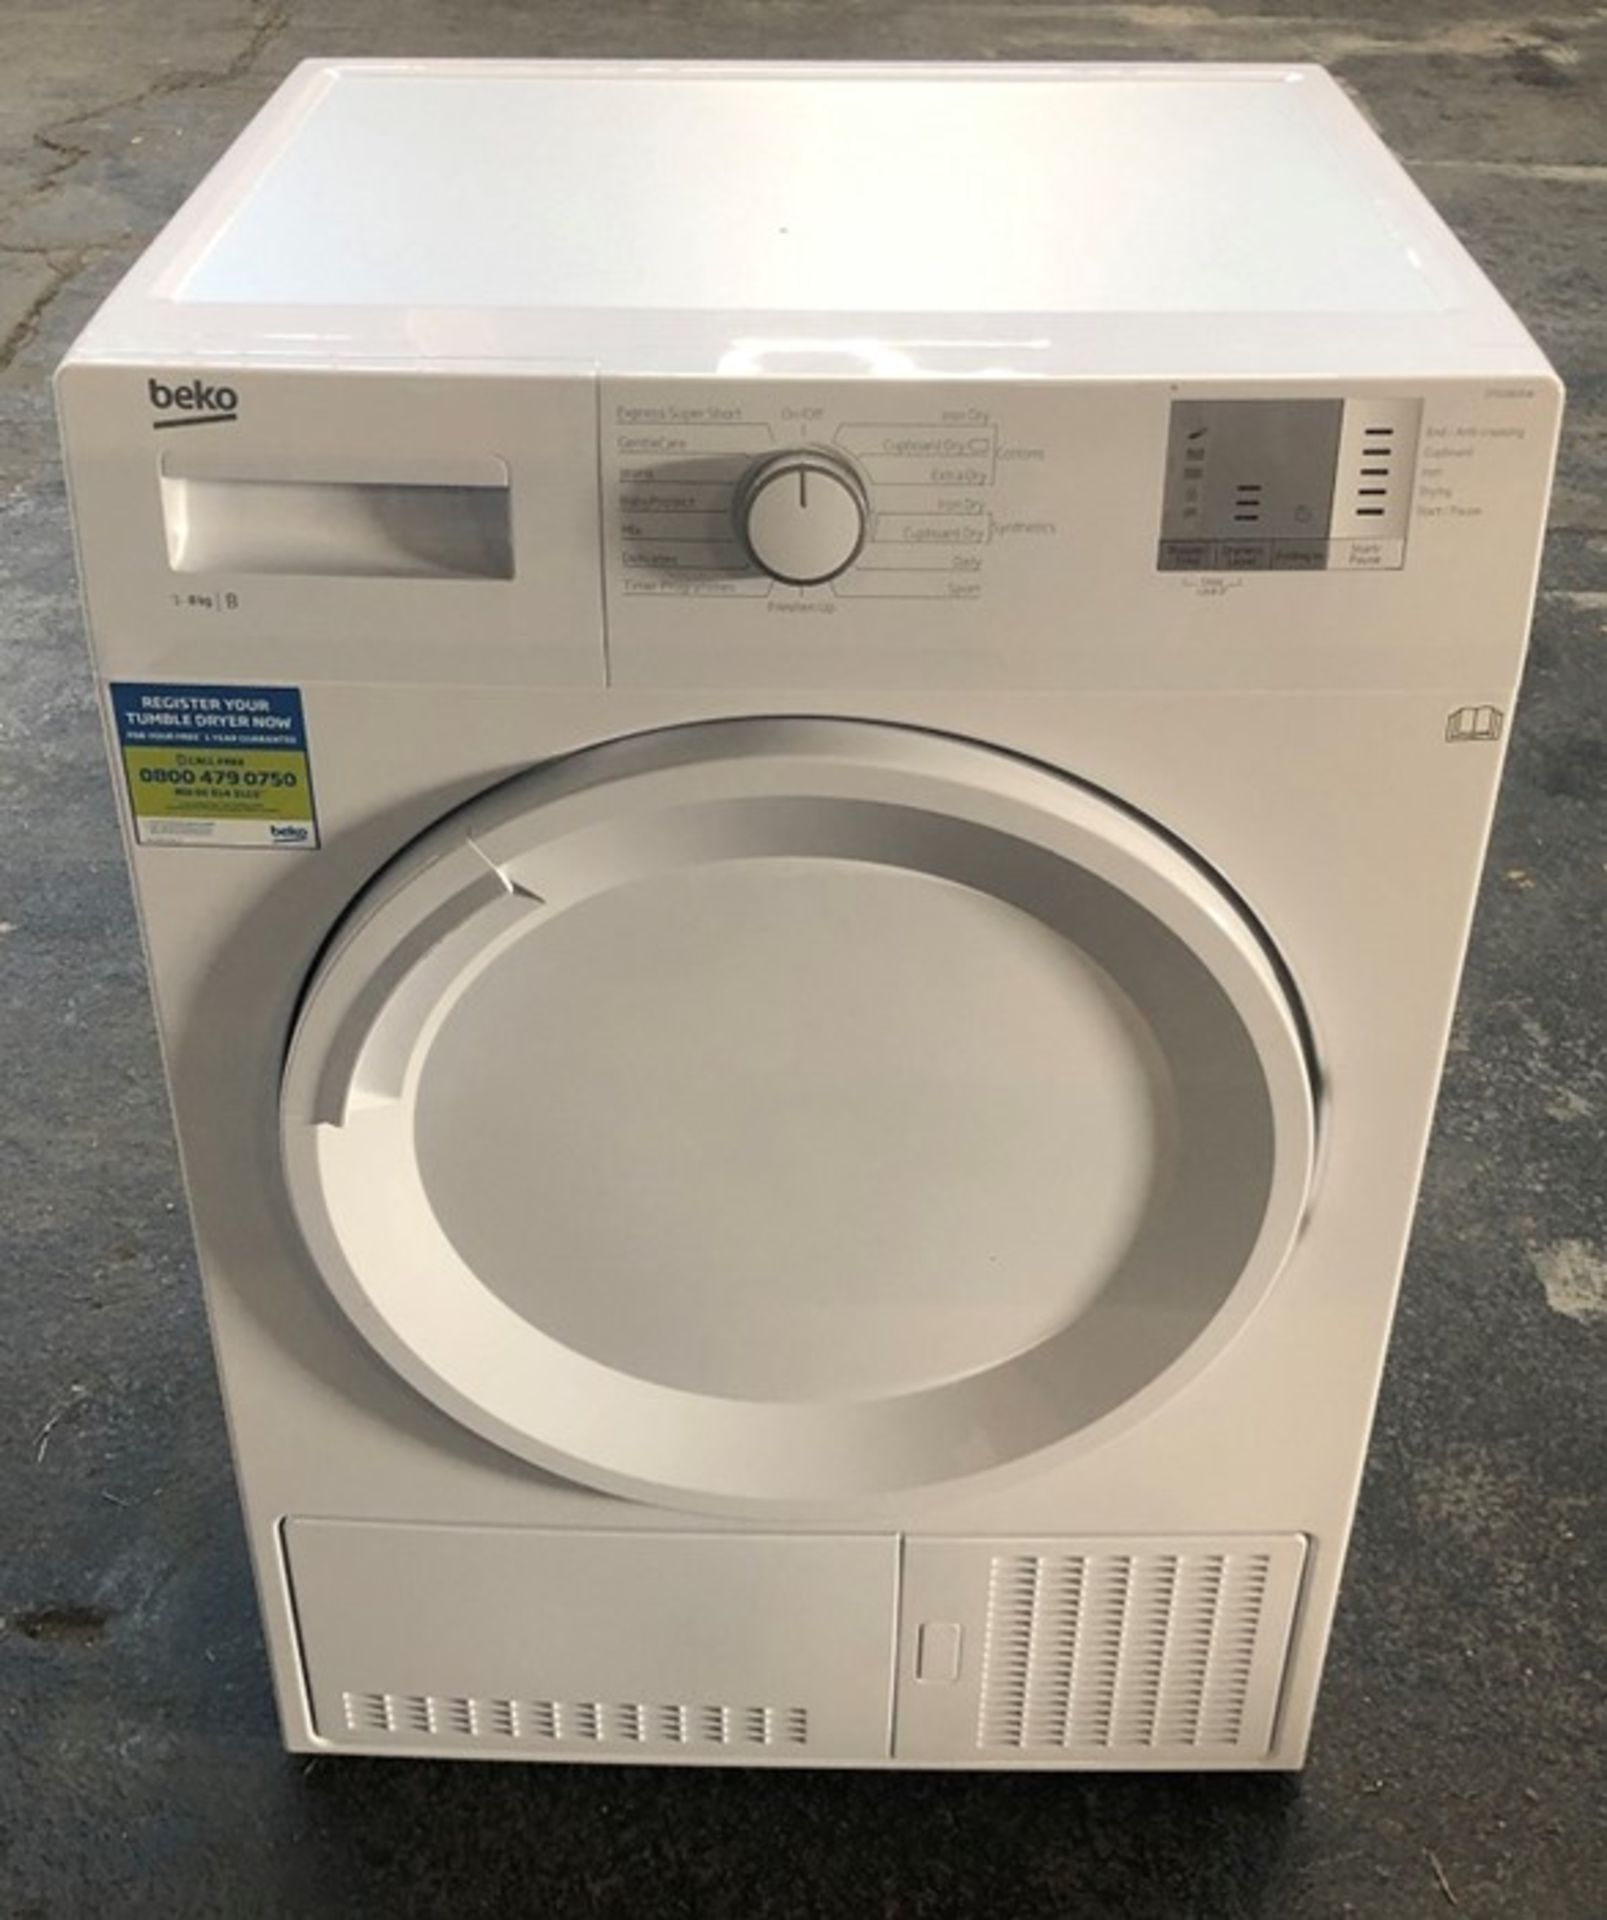 1 GRADE A BEKO CONDENSER TUMBLE DRYER IN WHITE - DTGC8101W / RRP £279.00 (PUBLIC VIEWING AVAILABLE)